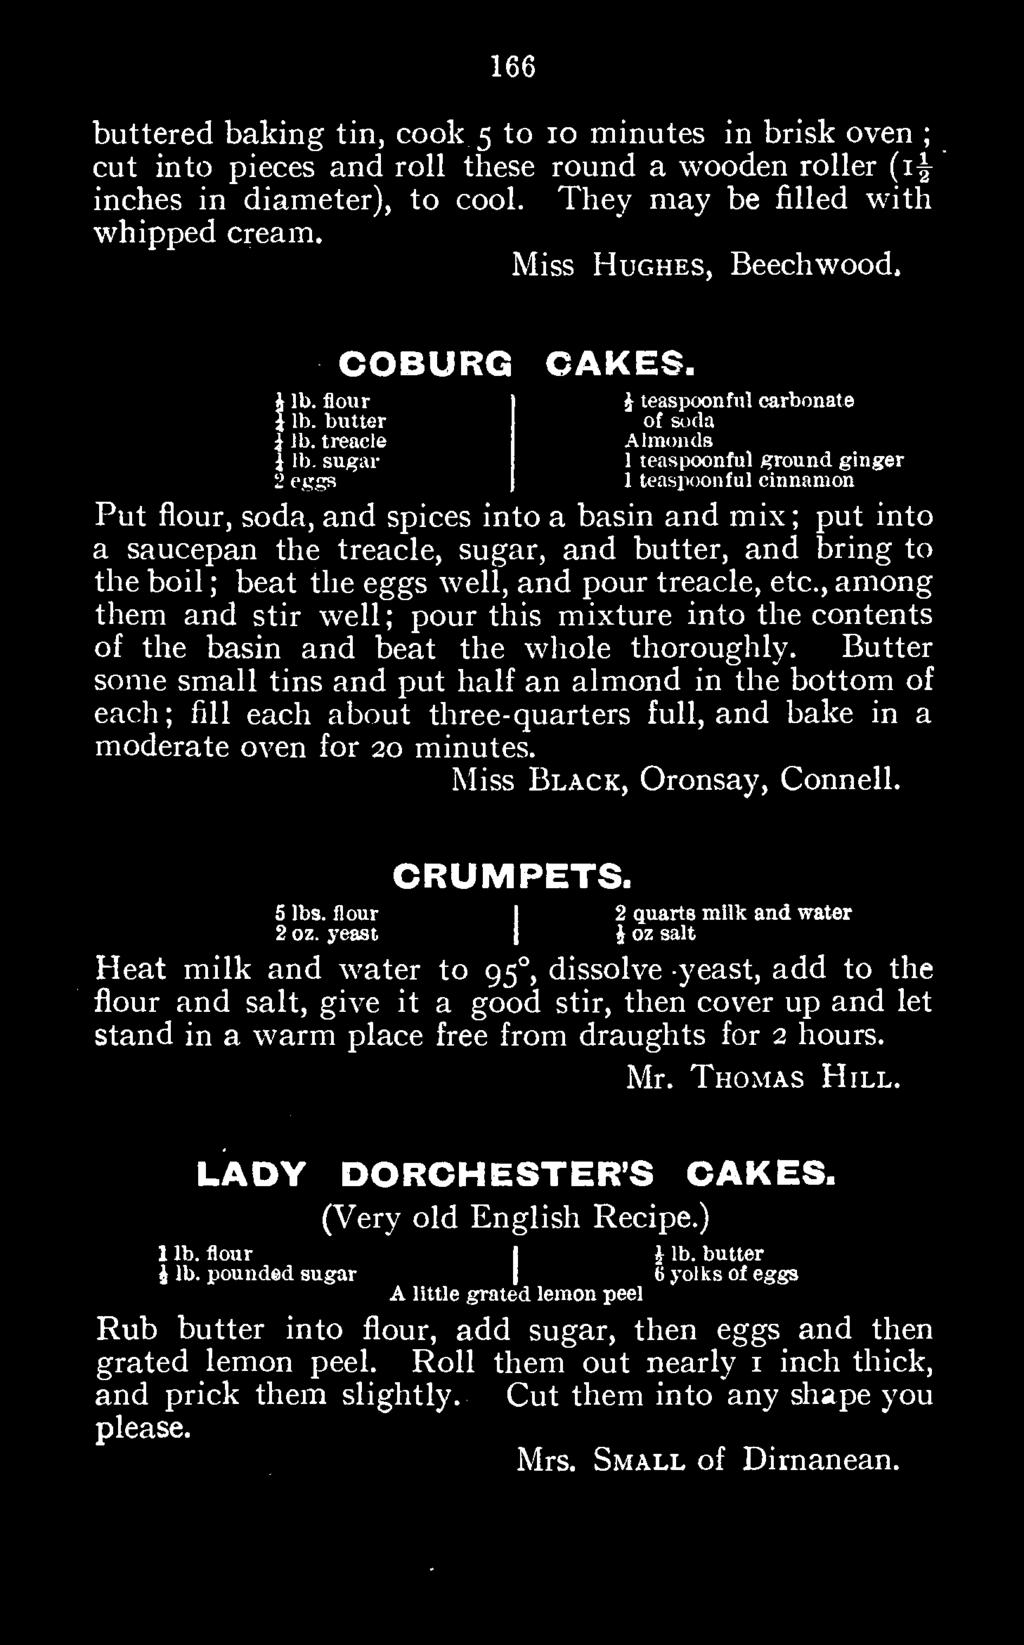 Butter some small tins and put half an almond in the bottom of each; fill each about three-quarters full, and bake in a moderate oven for 20 minutes. Miss Black, Oronsay, Connell. CRUMPETS. 52 lbs.